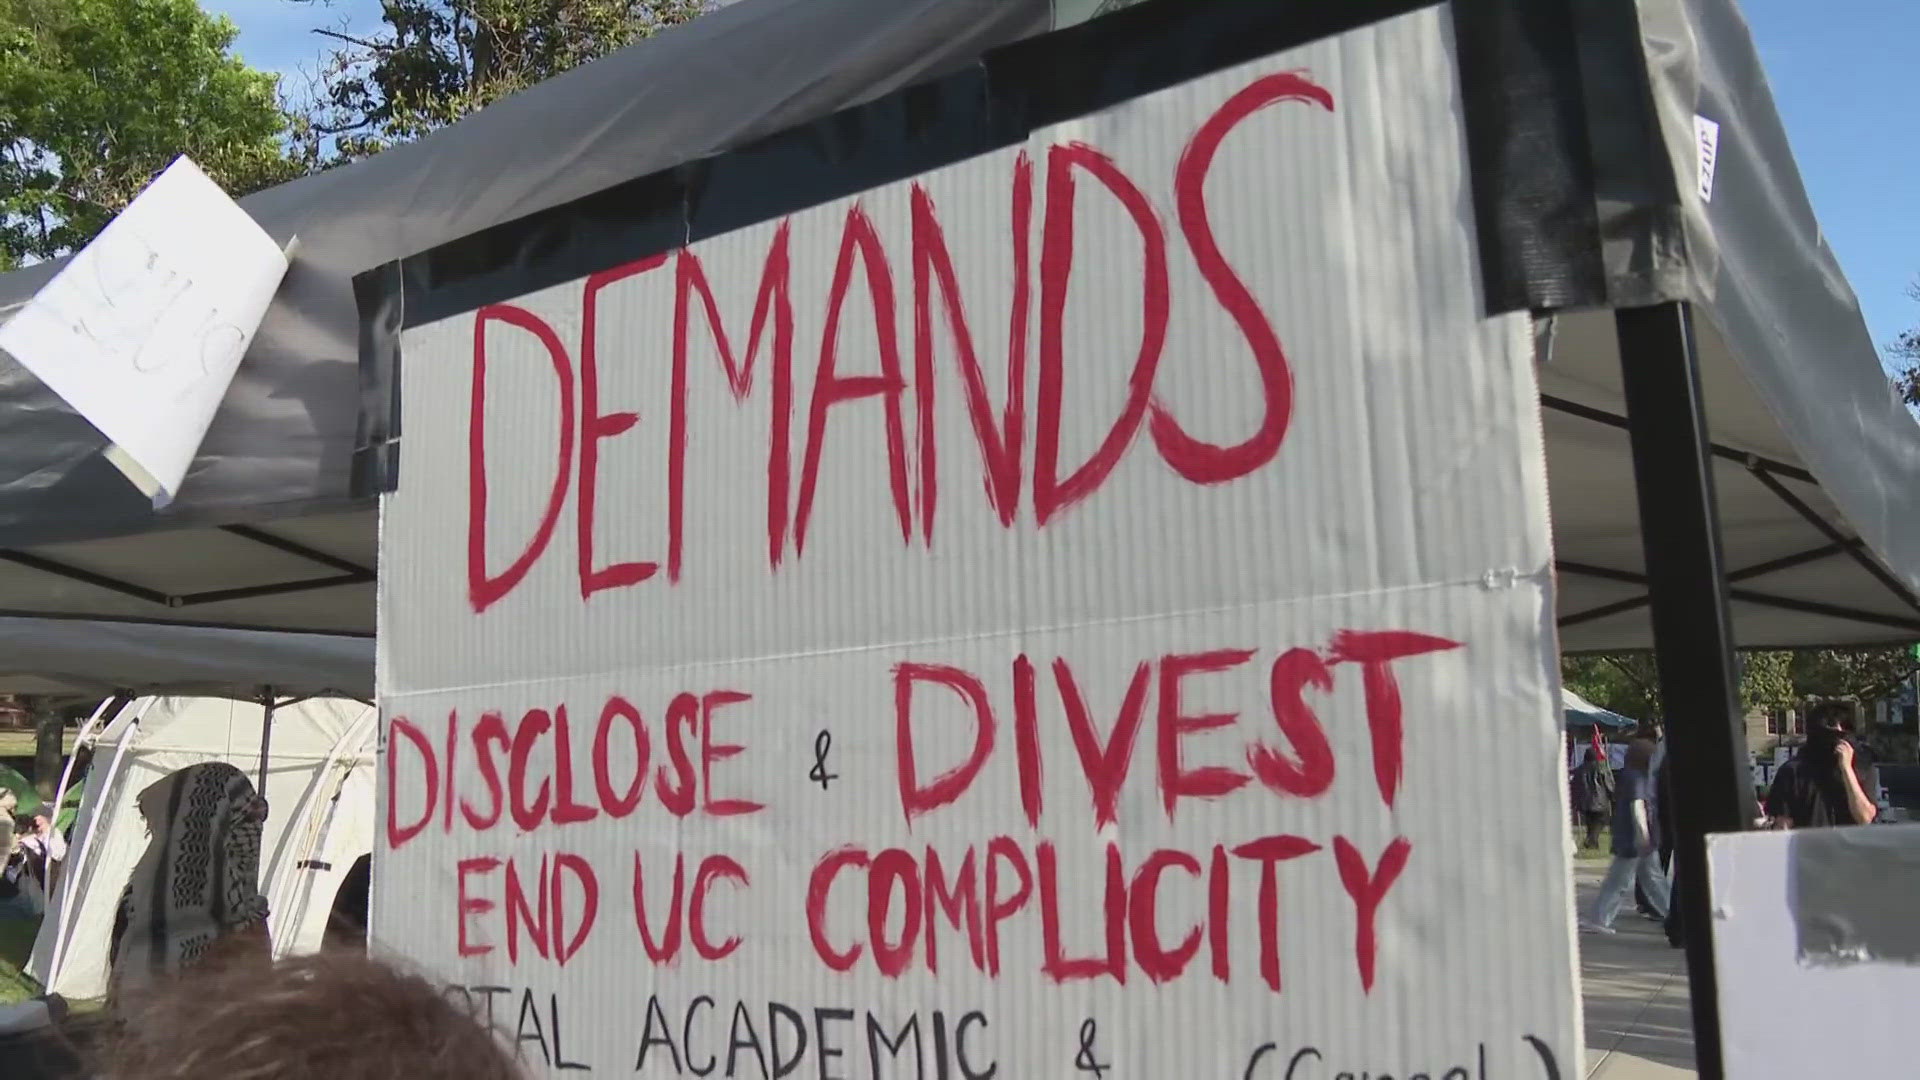 The group listed its demands of the university on it’s front entrance, chief among them that the university divest in Israel and the war in Gaza.